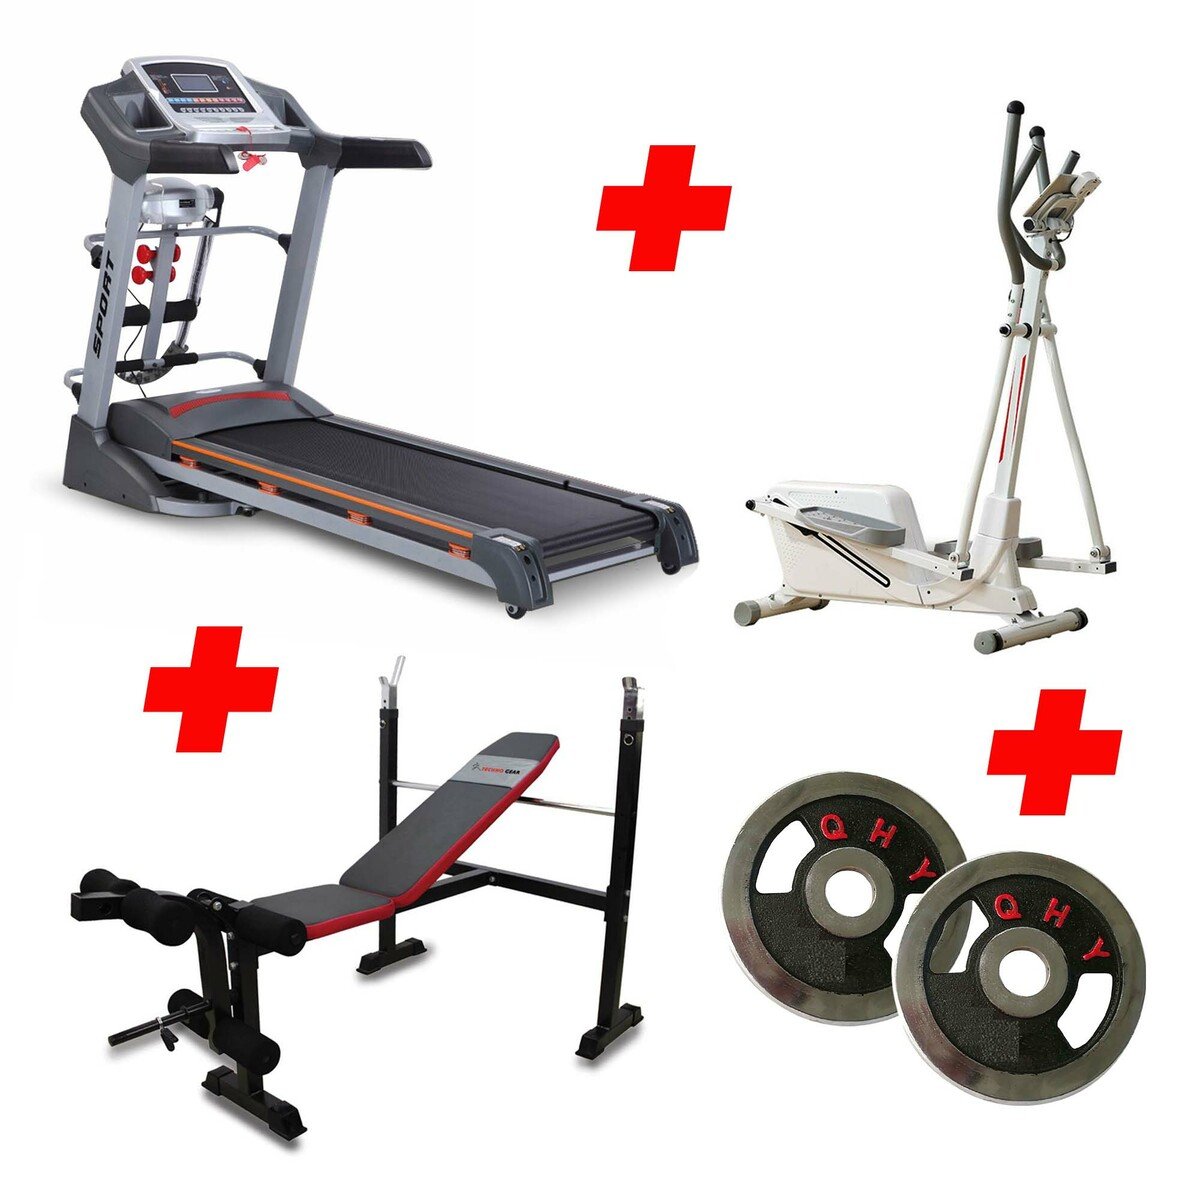 Techno Gear Treadmill TG6088DS 3HP + Sports Champion Elliptical Trainer HJ-30061-1 + Weight Lifting Bench + Chrome Weight 2Piece Plate 10Kg